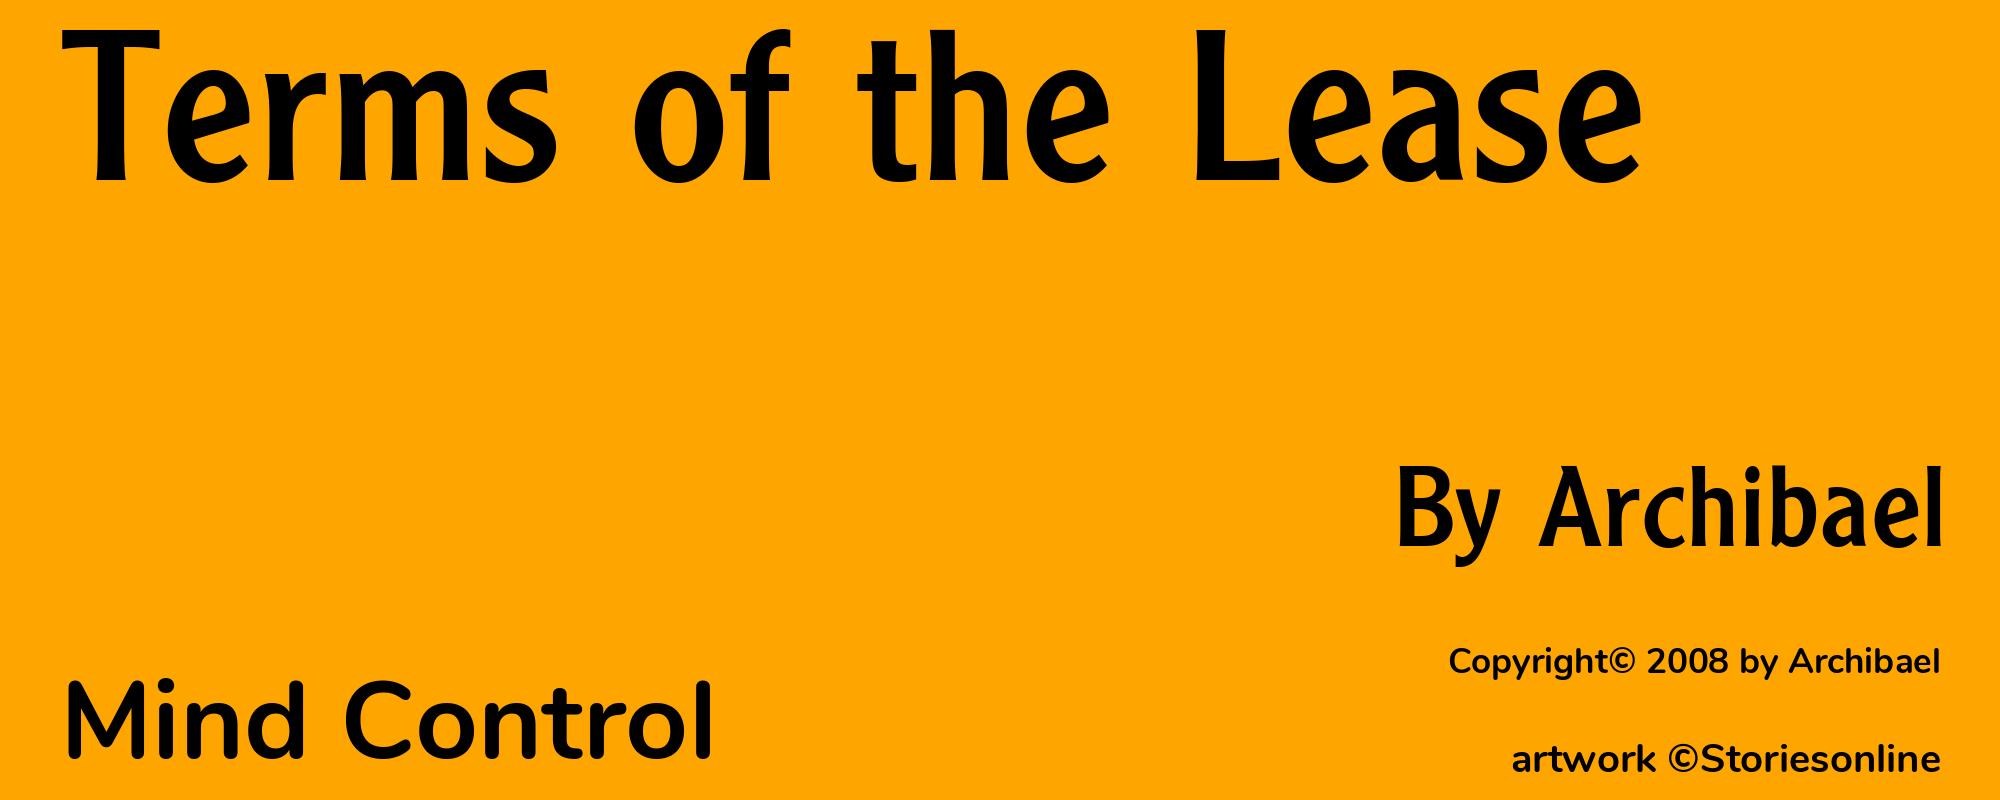 Terms of the Lease - Cover